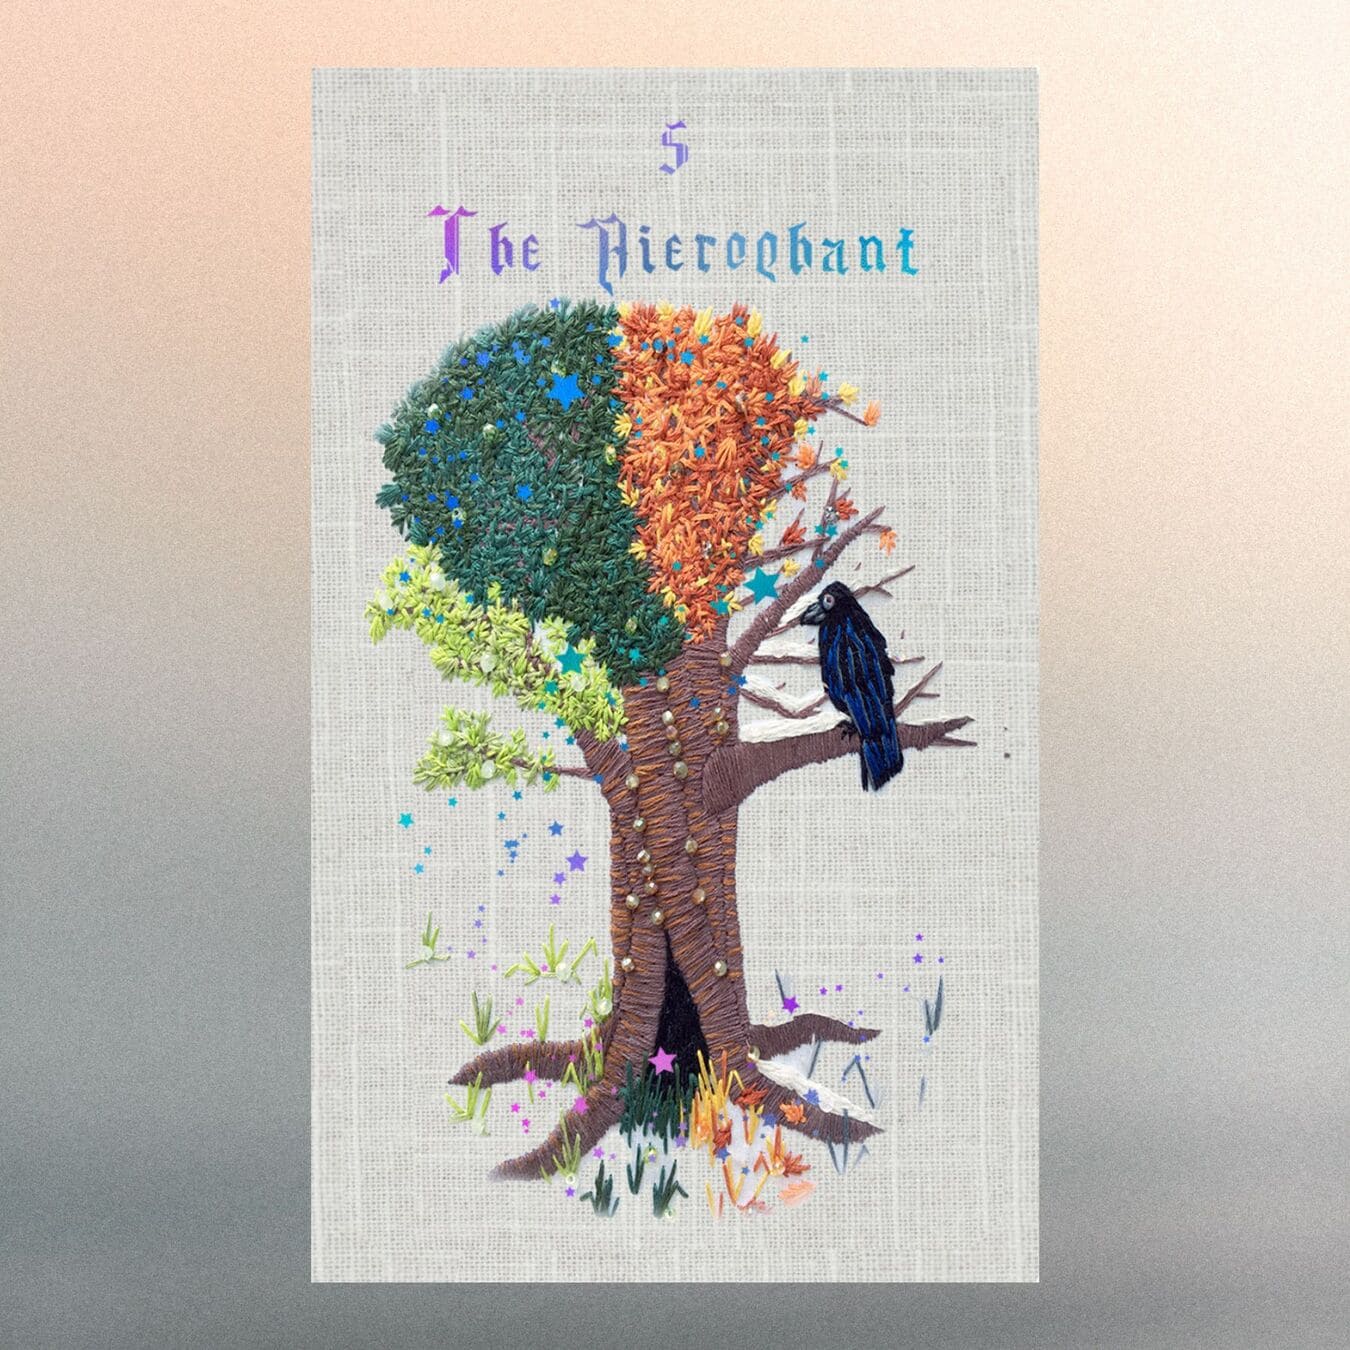 The Hierophant meaning in the tarot